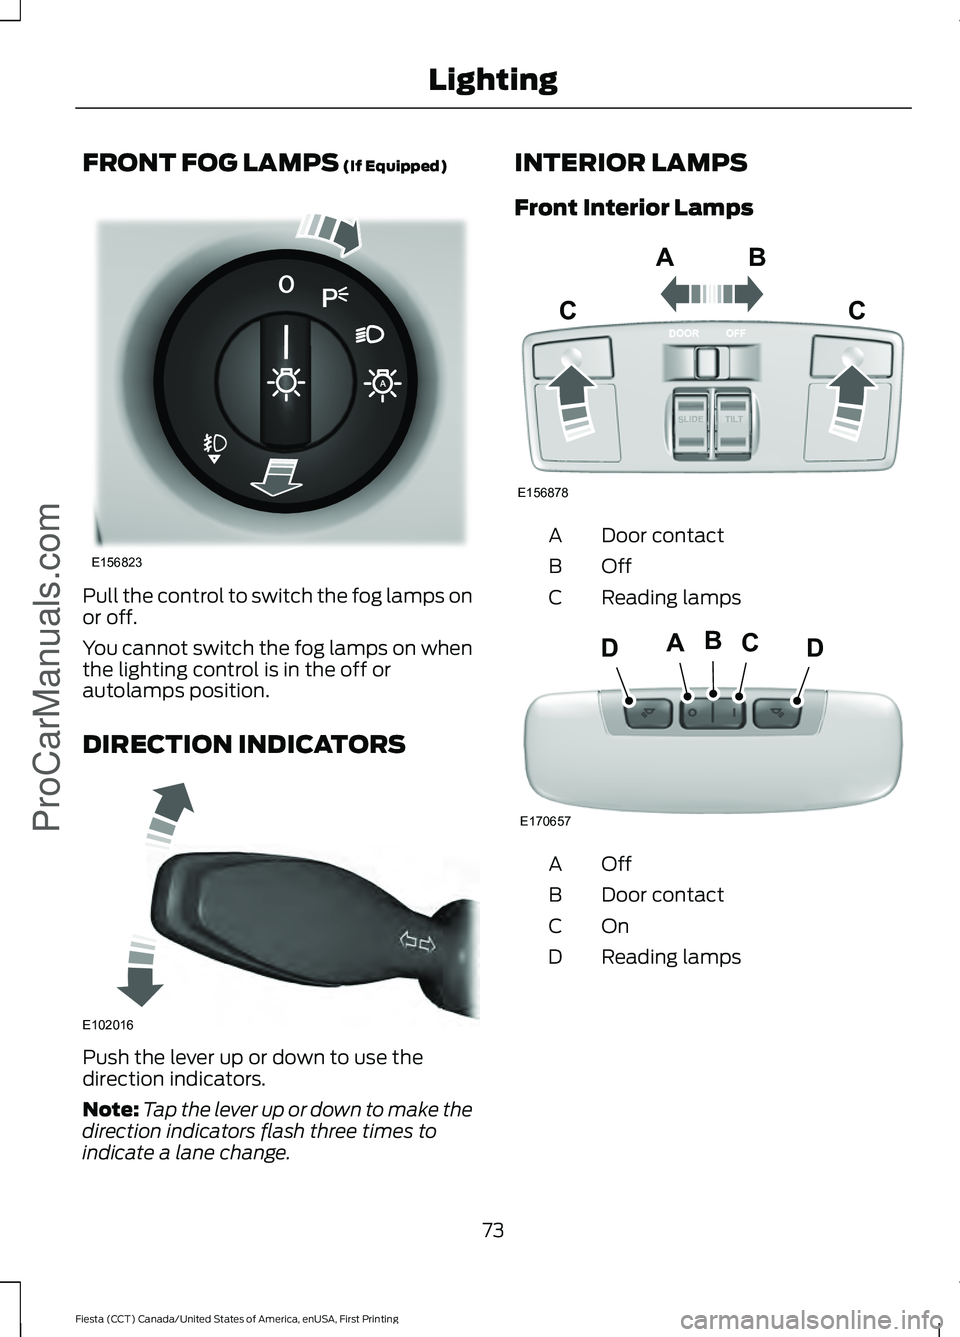 FORD FIESTA 2016 Manual PDF FRONT FOG LAMPS (If Equipped)
Pull the control to switch the fog lamps on
or off.
You cannot switch the fog lamps on when
the lighting control is in the off or
autolamps position.
DIRECTION INDICATORS